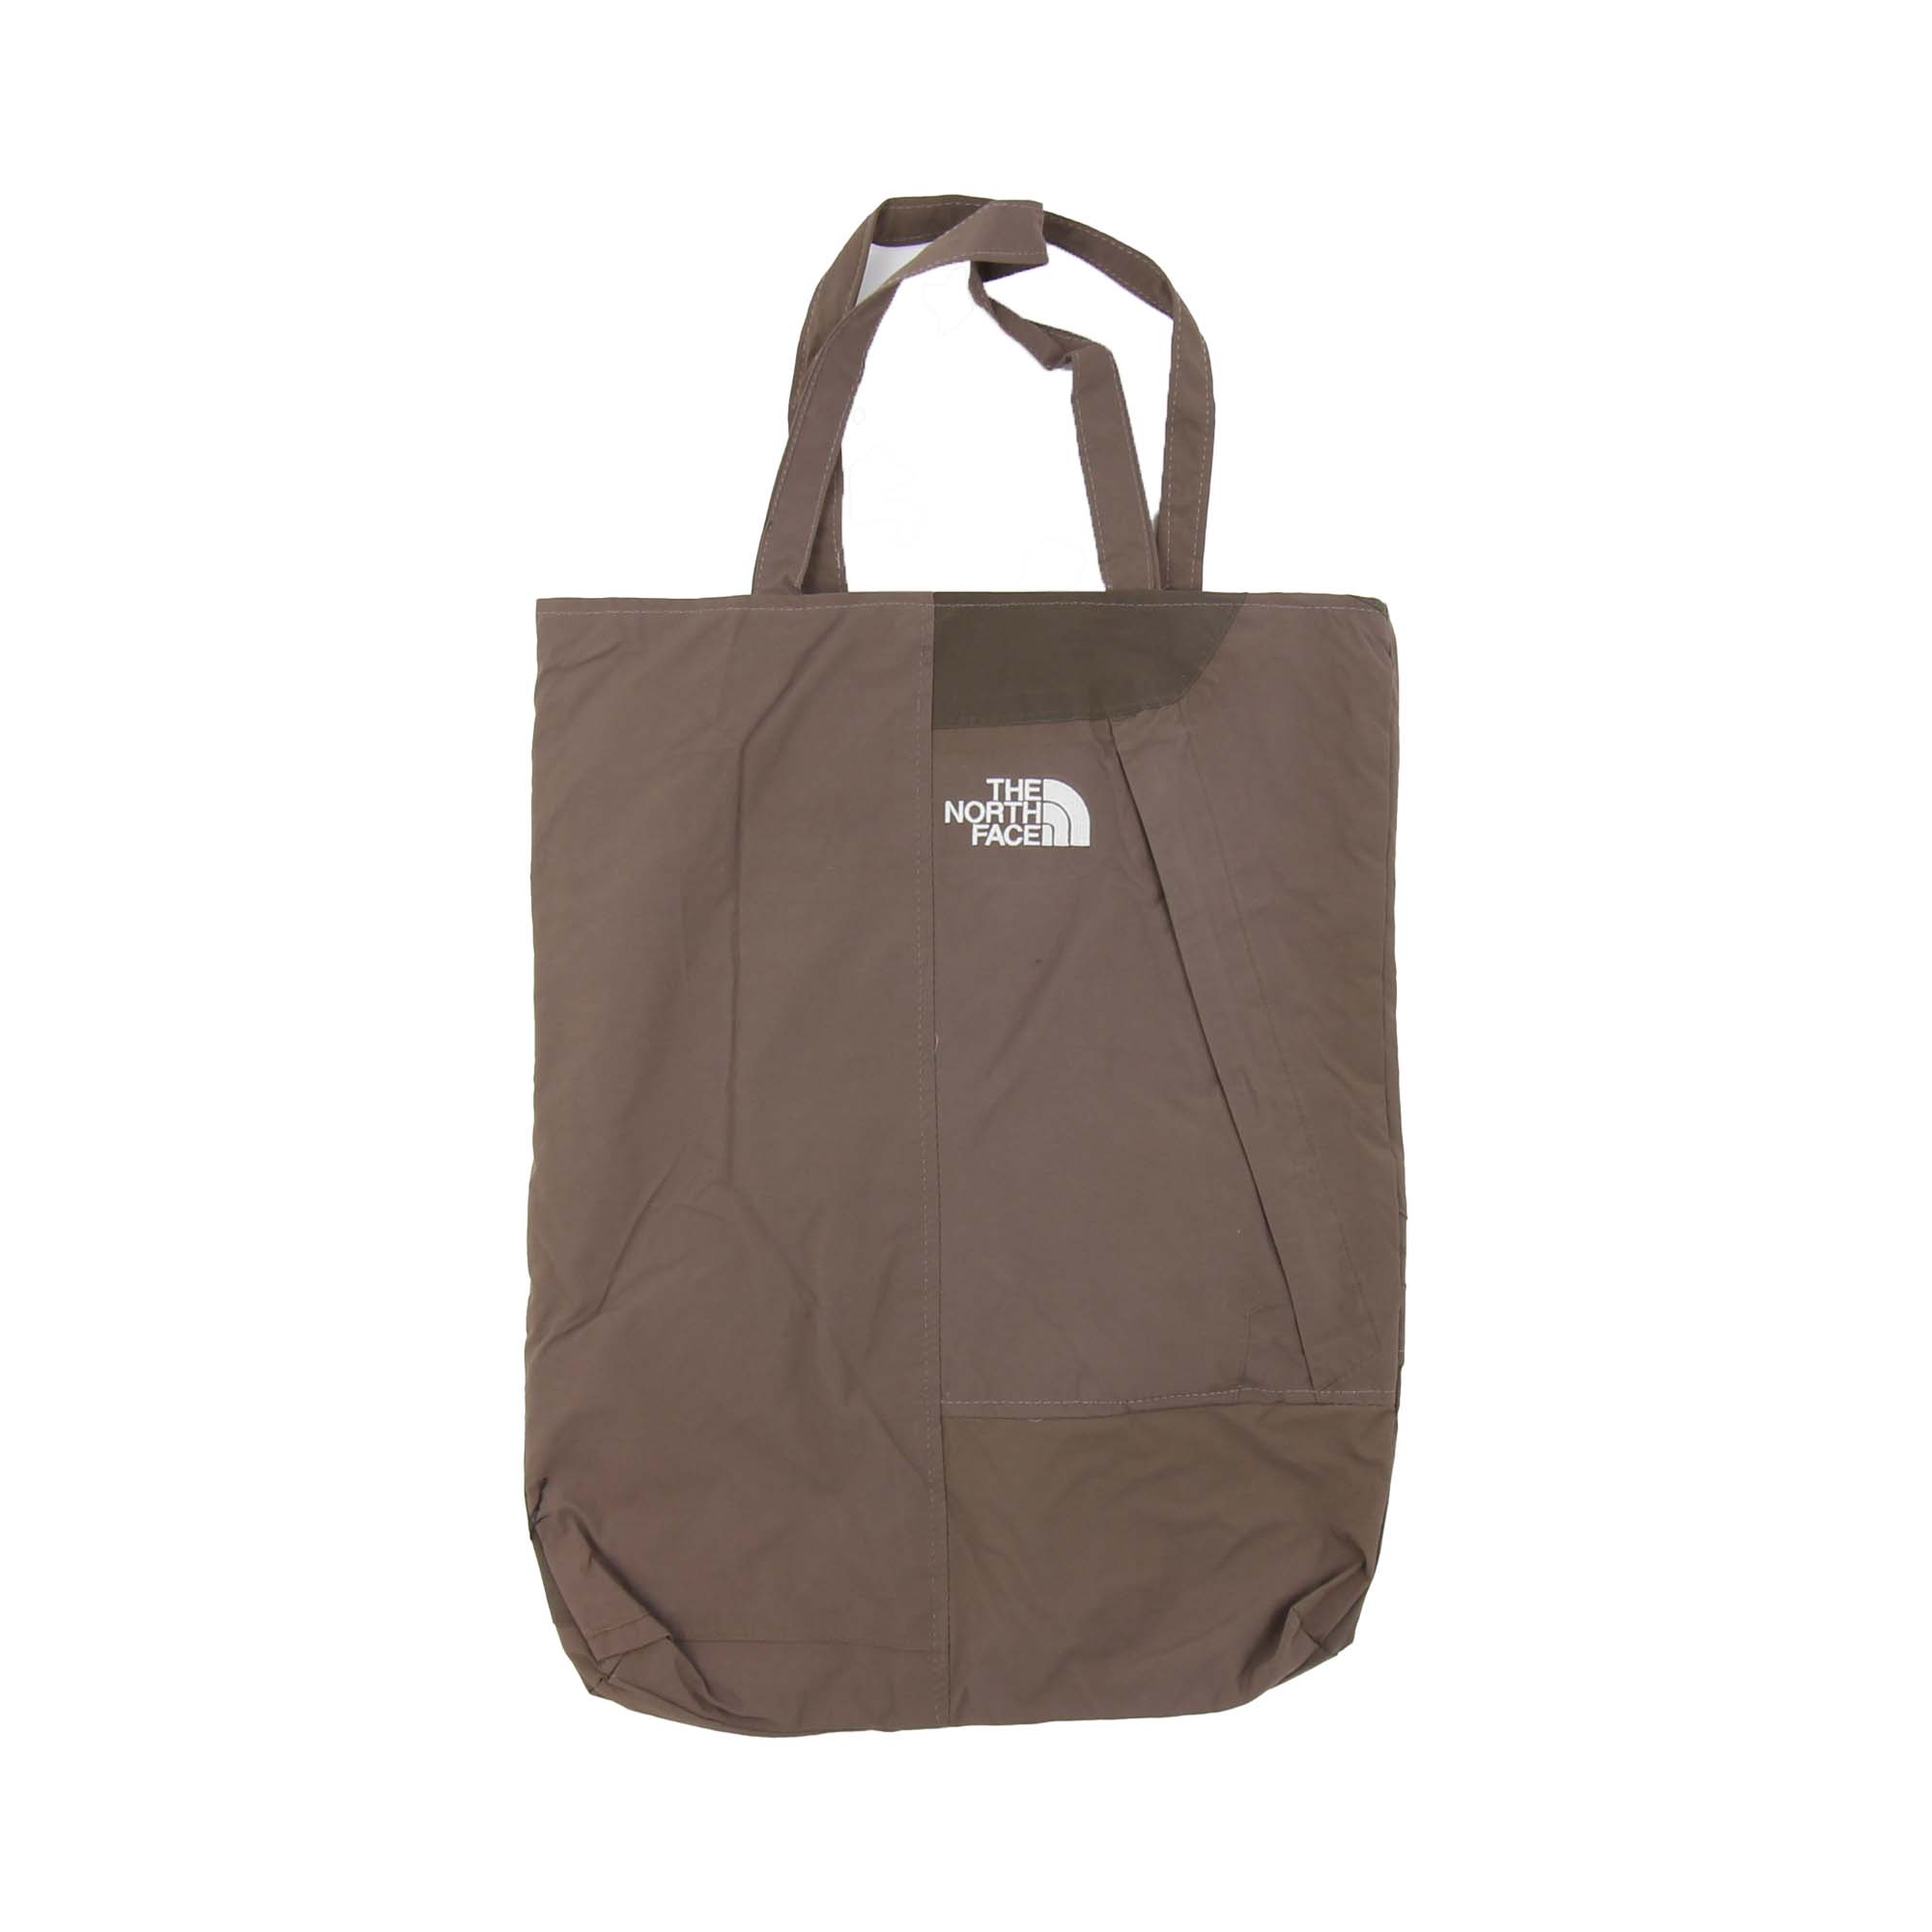 The North Face Rework Bag